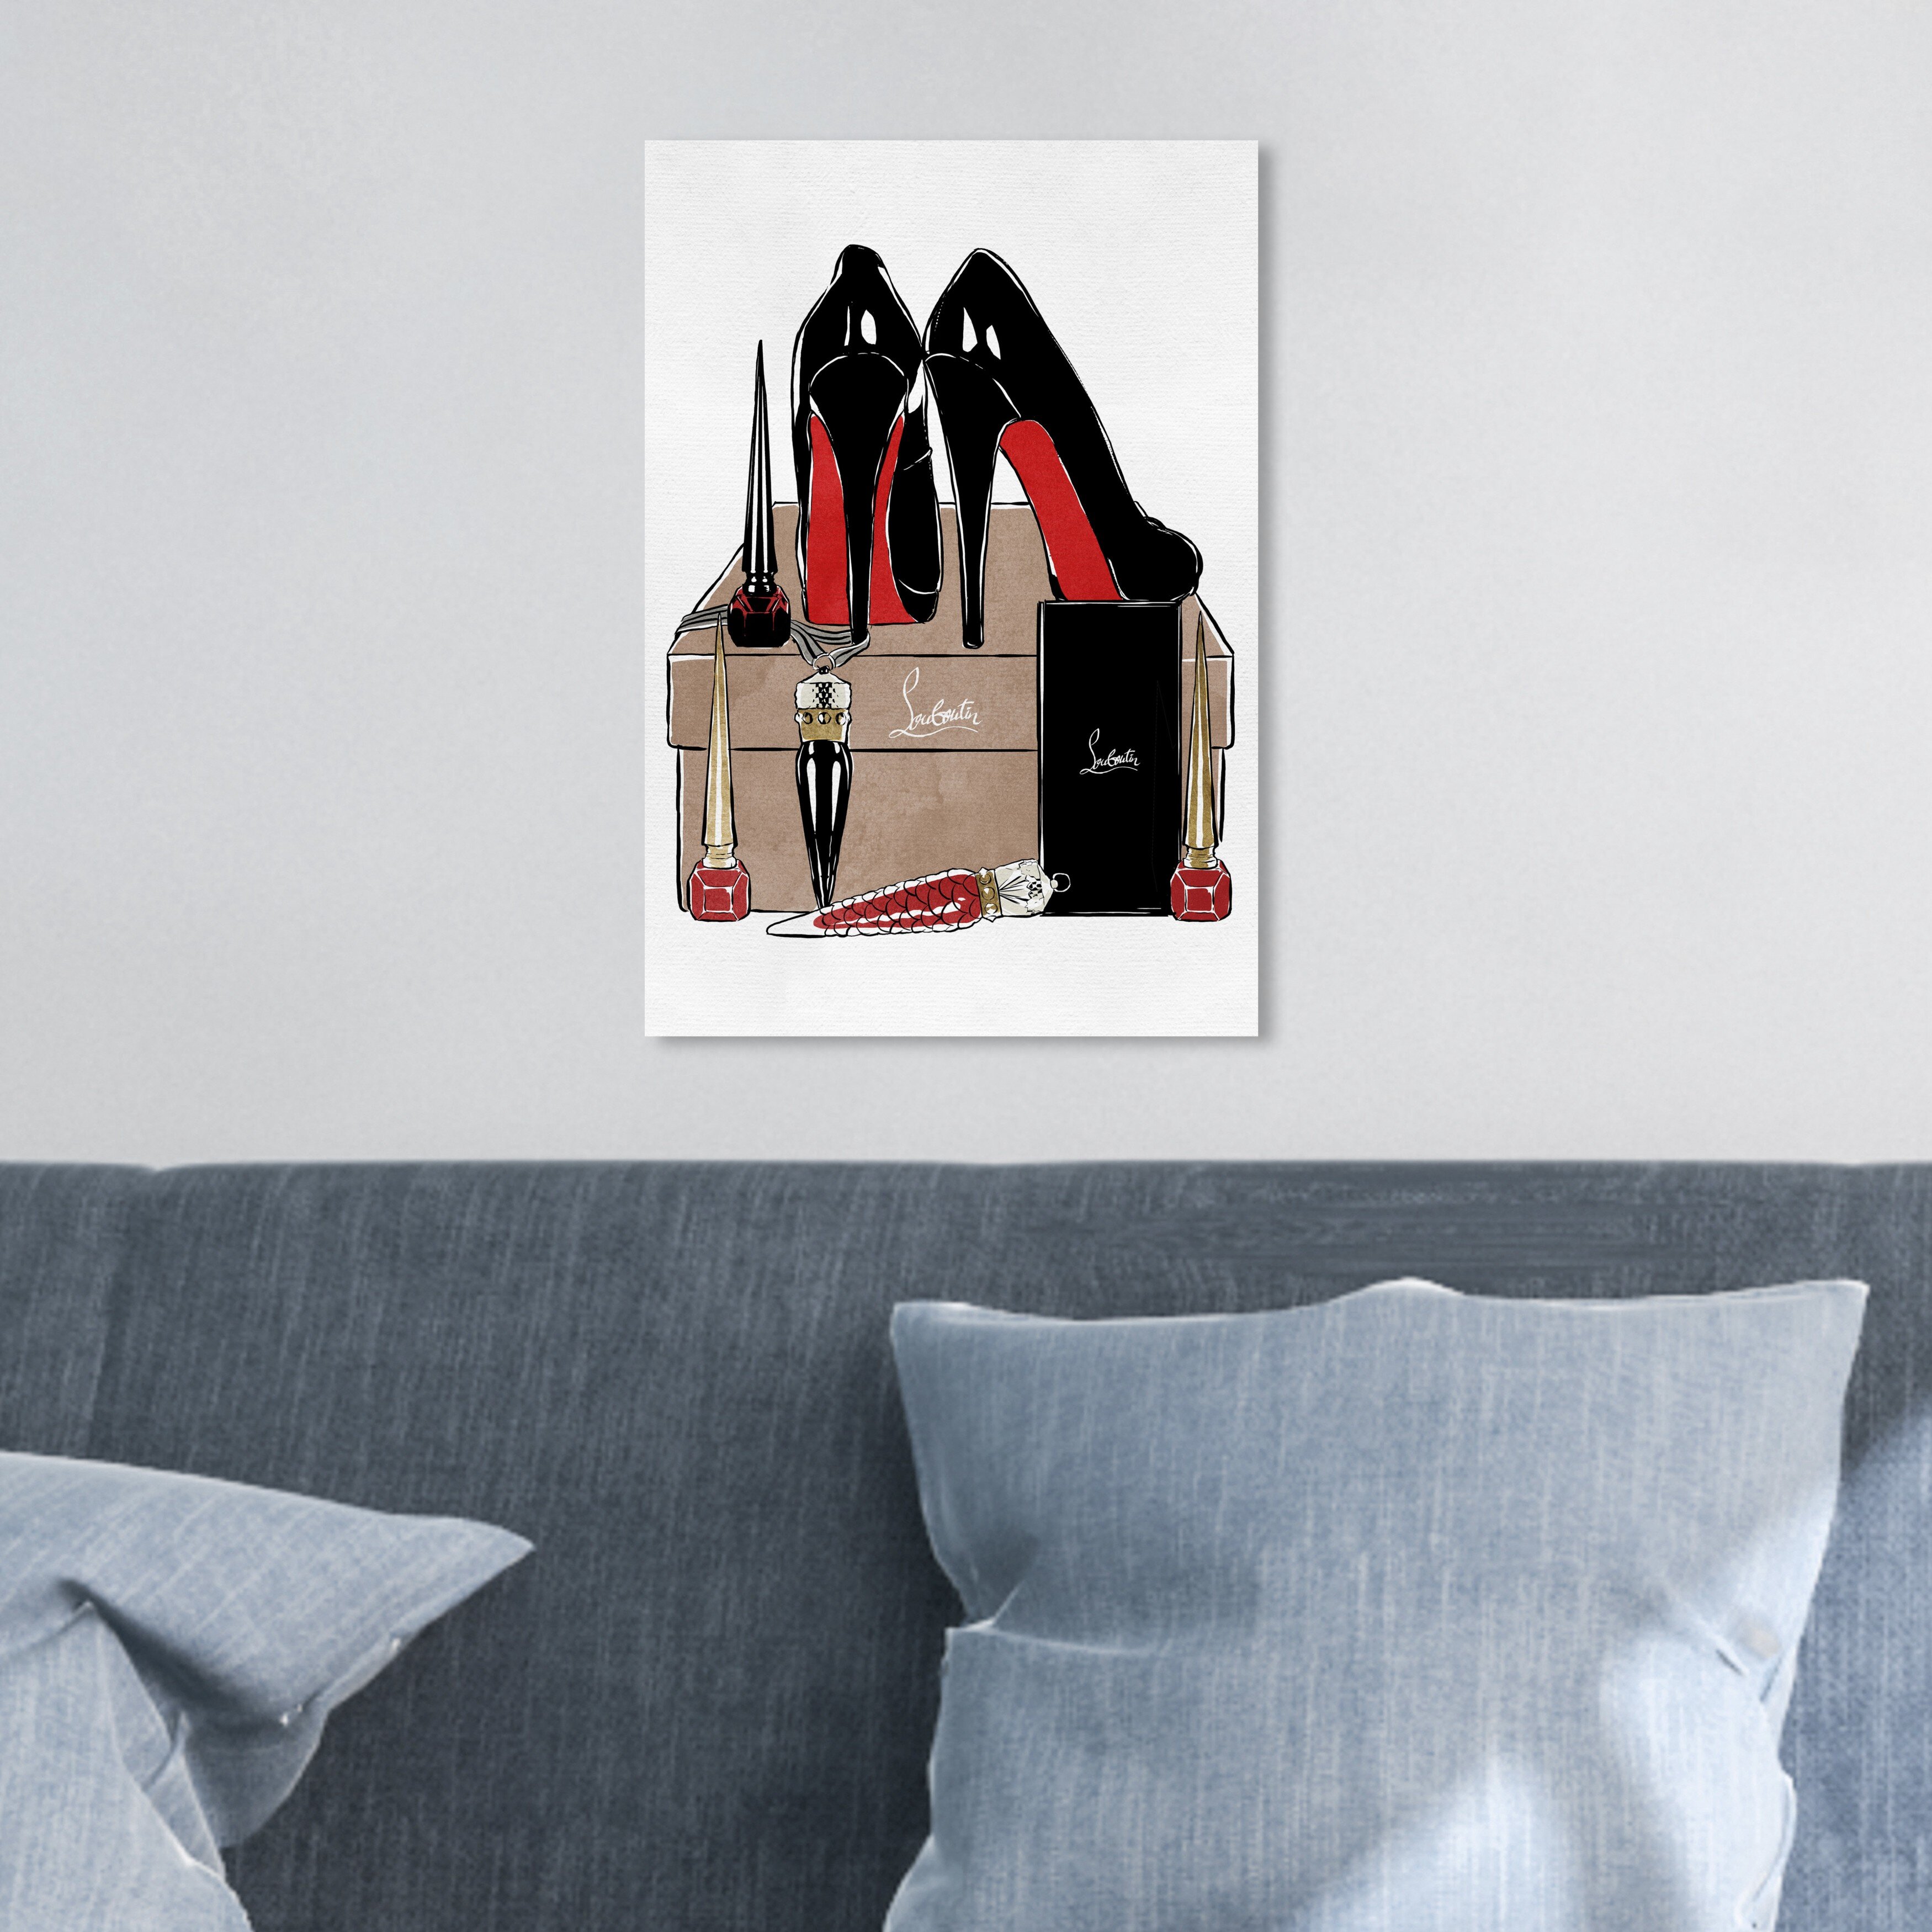 Stupell Industries Elegant Black Bow Heels Fashion Glam Bookstack Graphic Art Gallery-Wrapped Canvas Print Wall Art, 36x48, by Amanda Greenwood